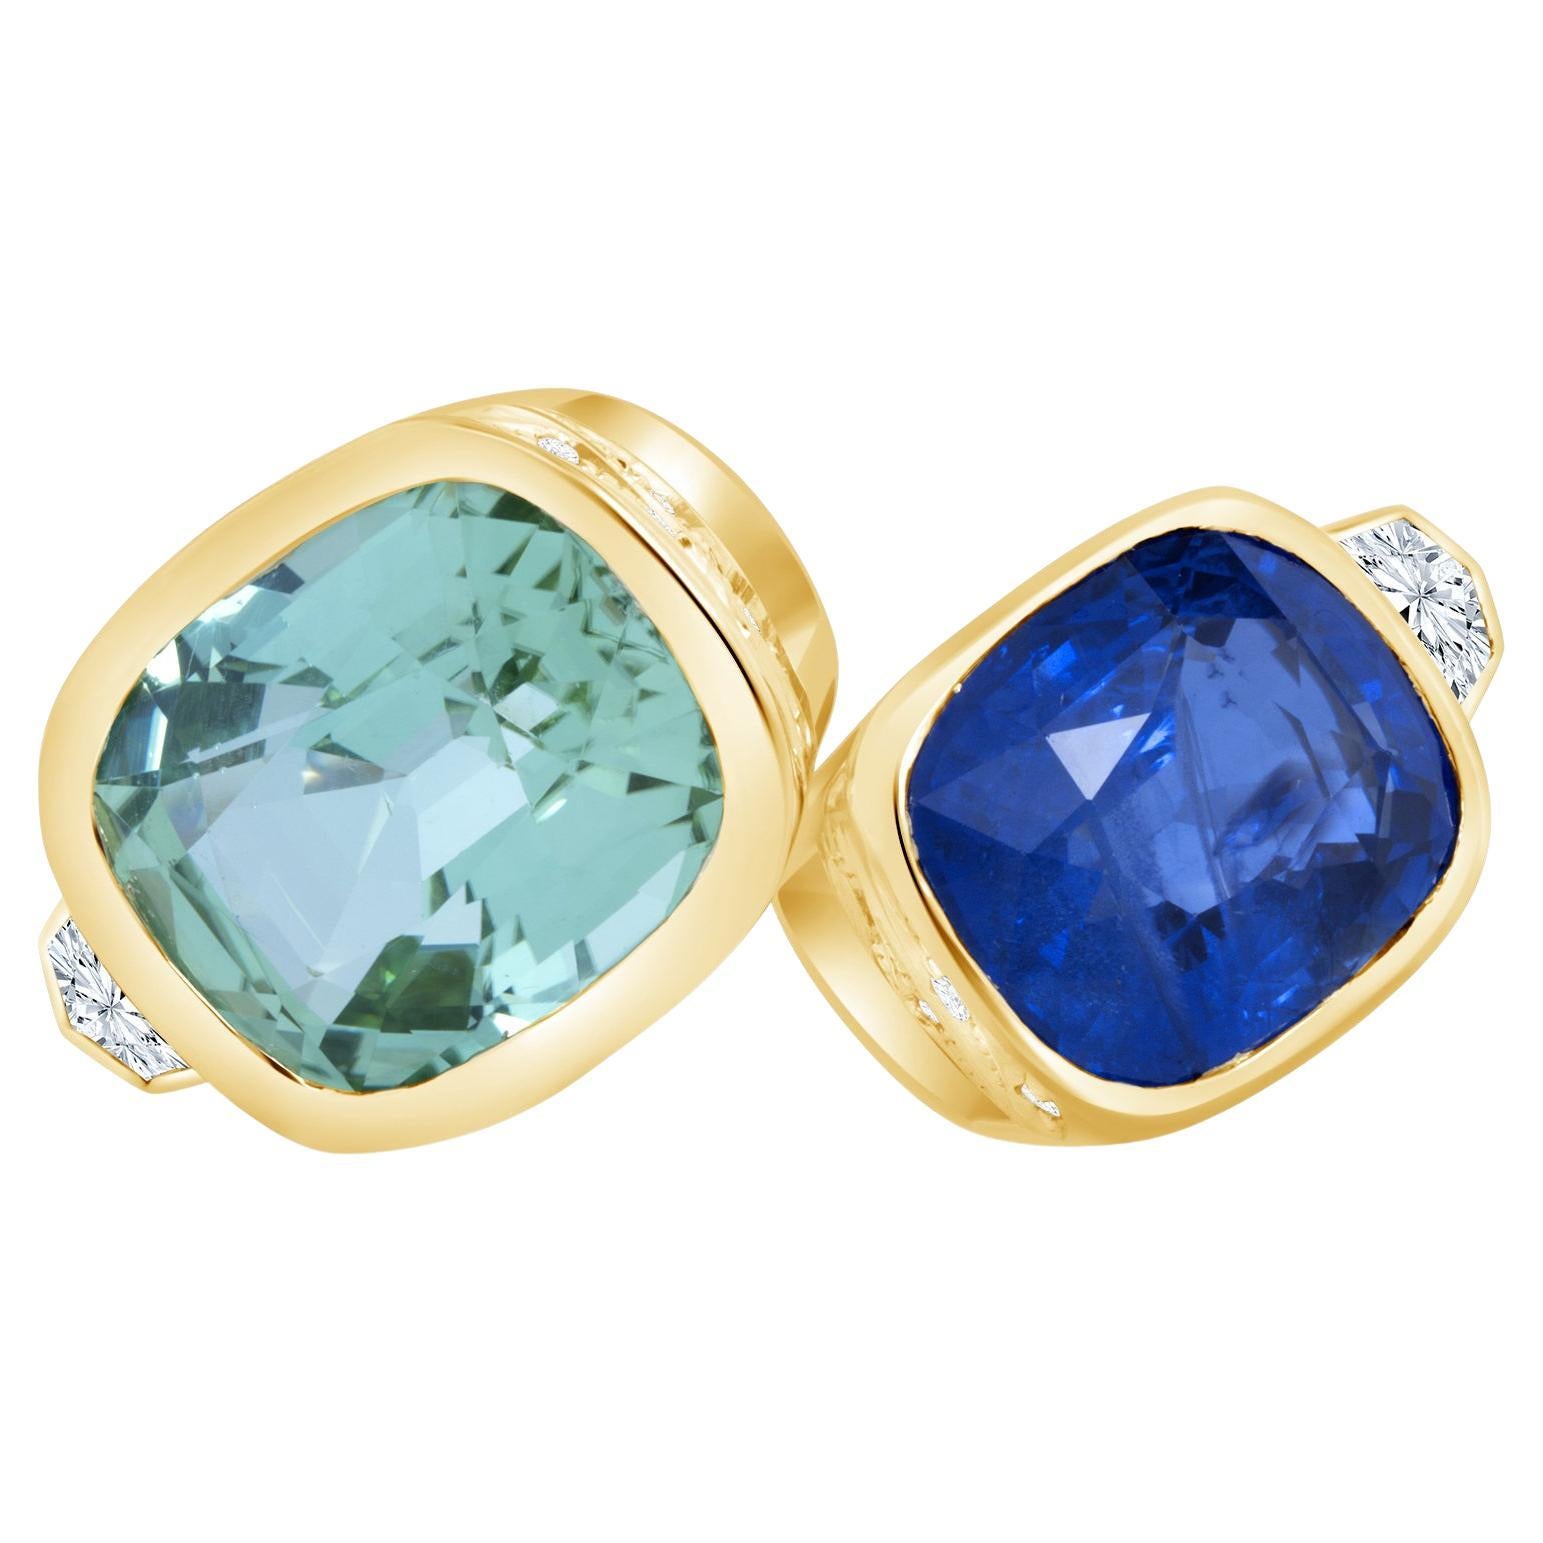 4.03ct Ceylon Sapphire and 5.07ct Afghan Tourmaline, cushion-cut bypass ring. For Sale